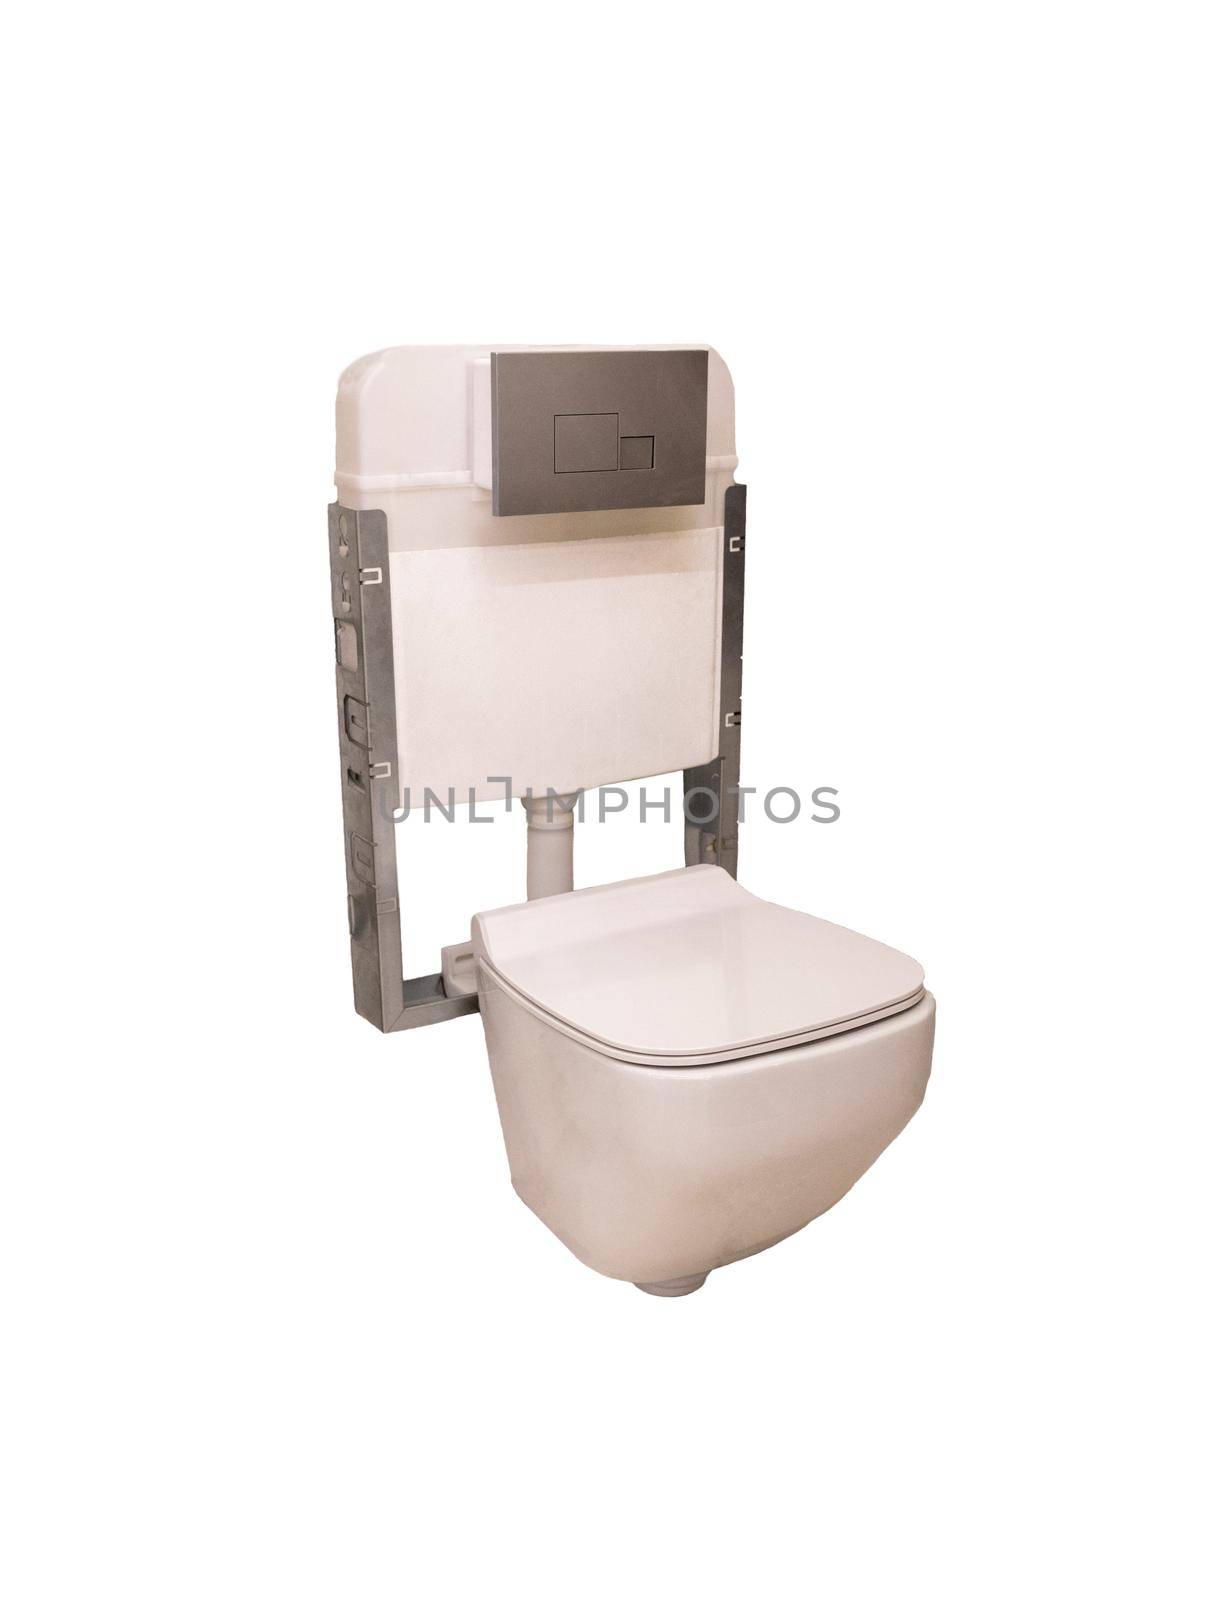 New clean white ceramic toilet bowl with white background by ferhad